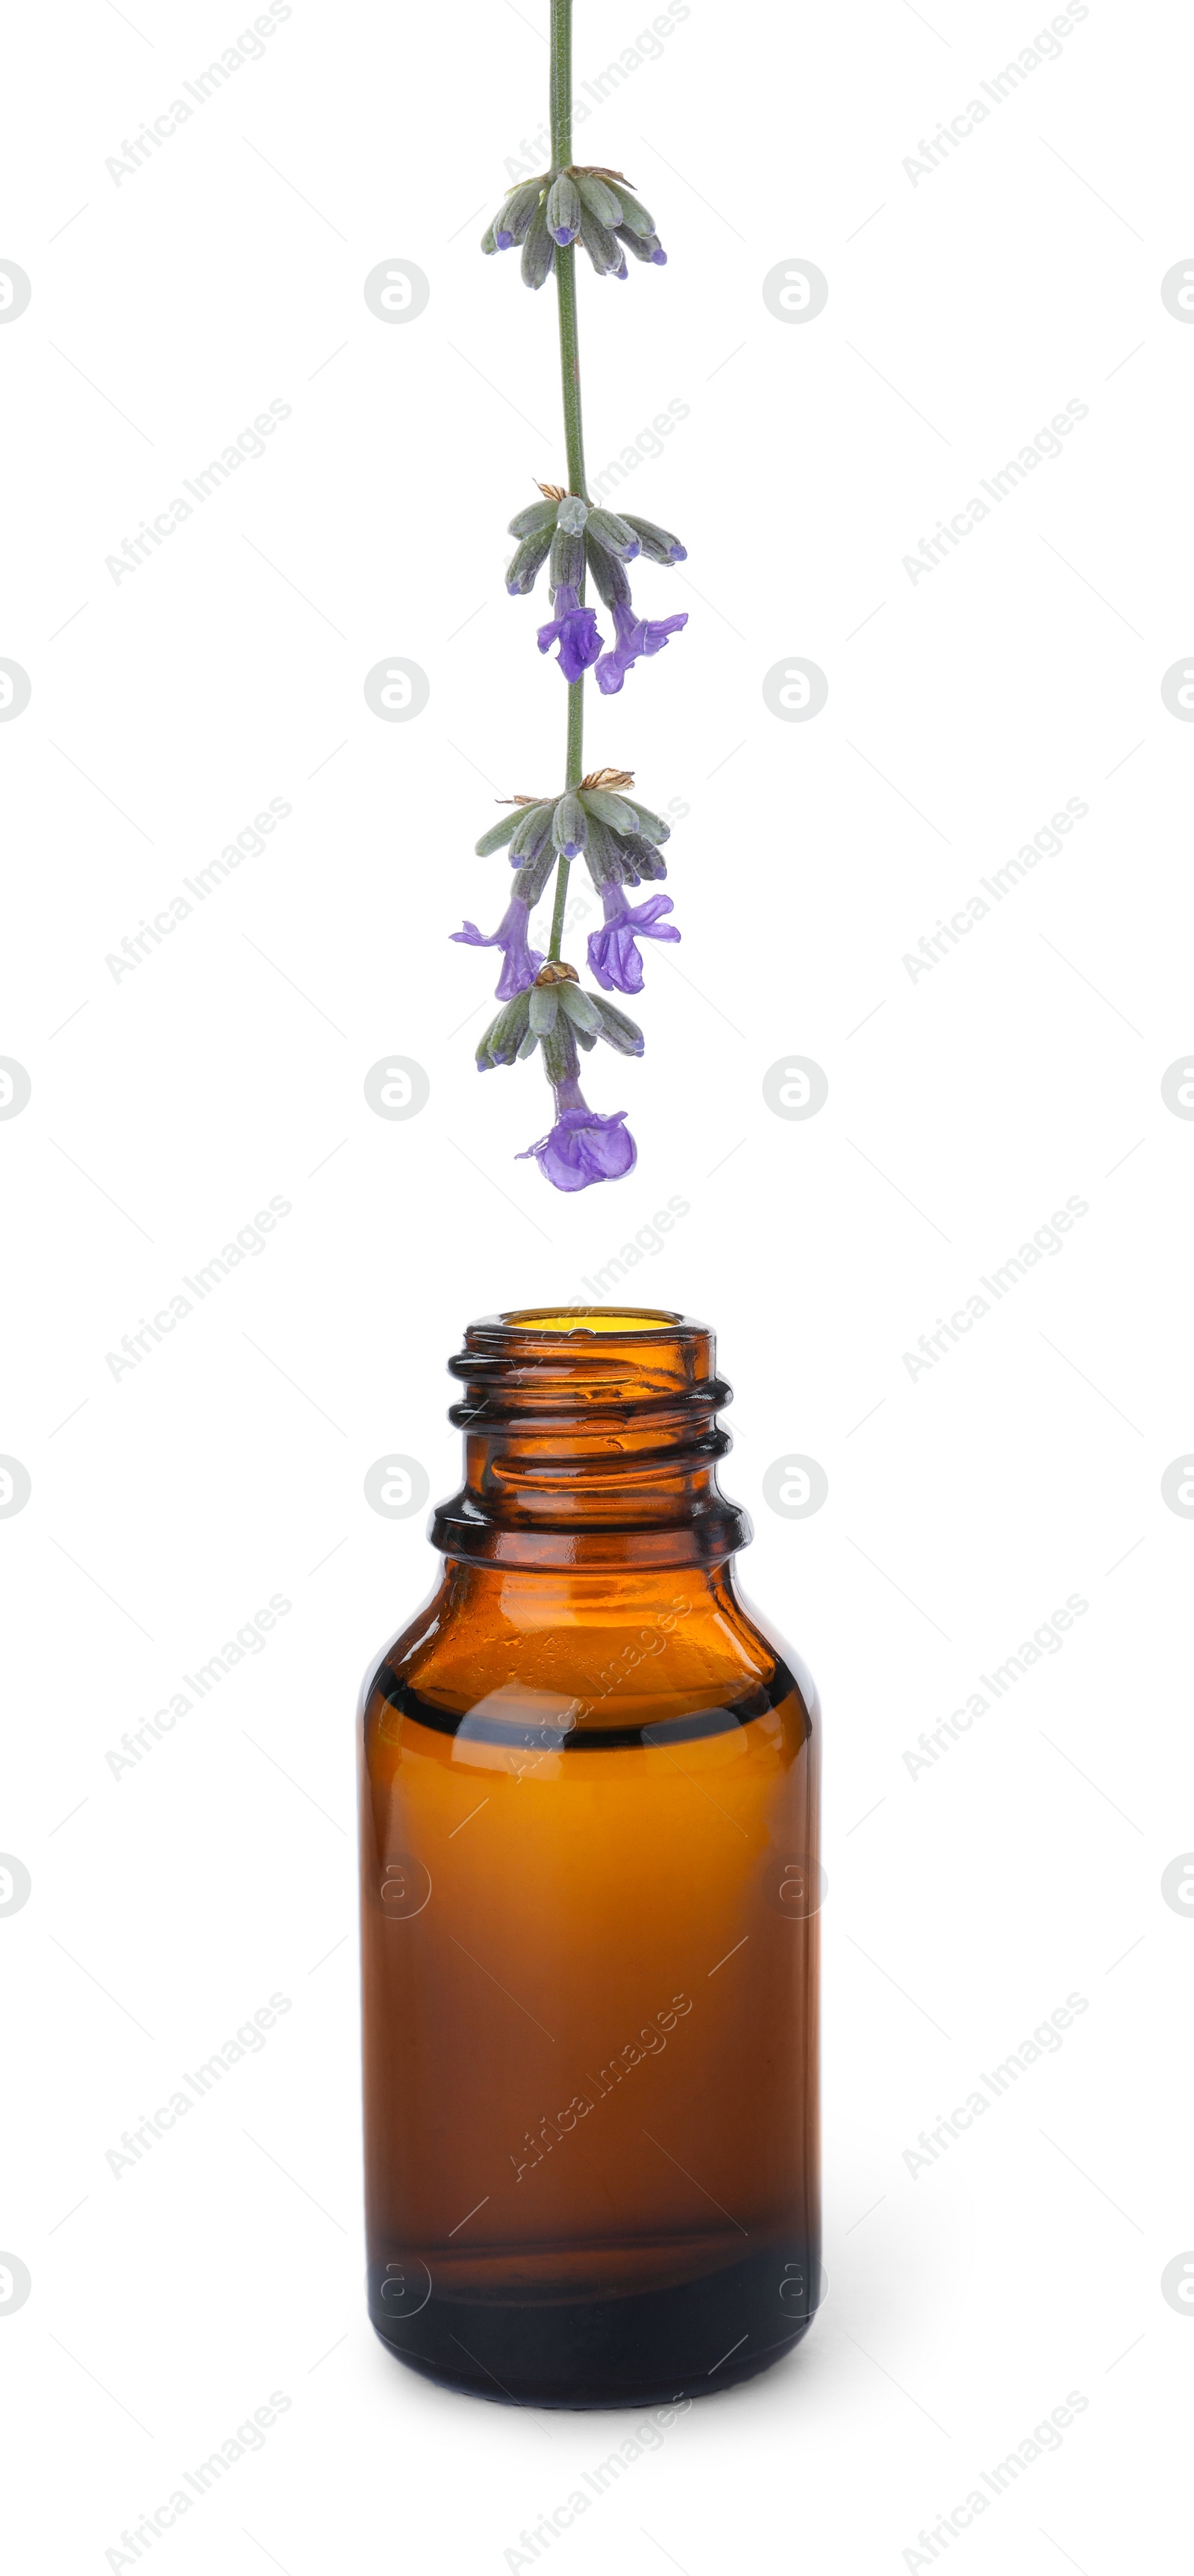 Photo of Dripping essential oil from lavender flower into bottle isolated on white